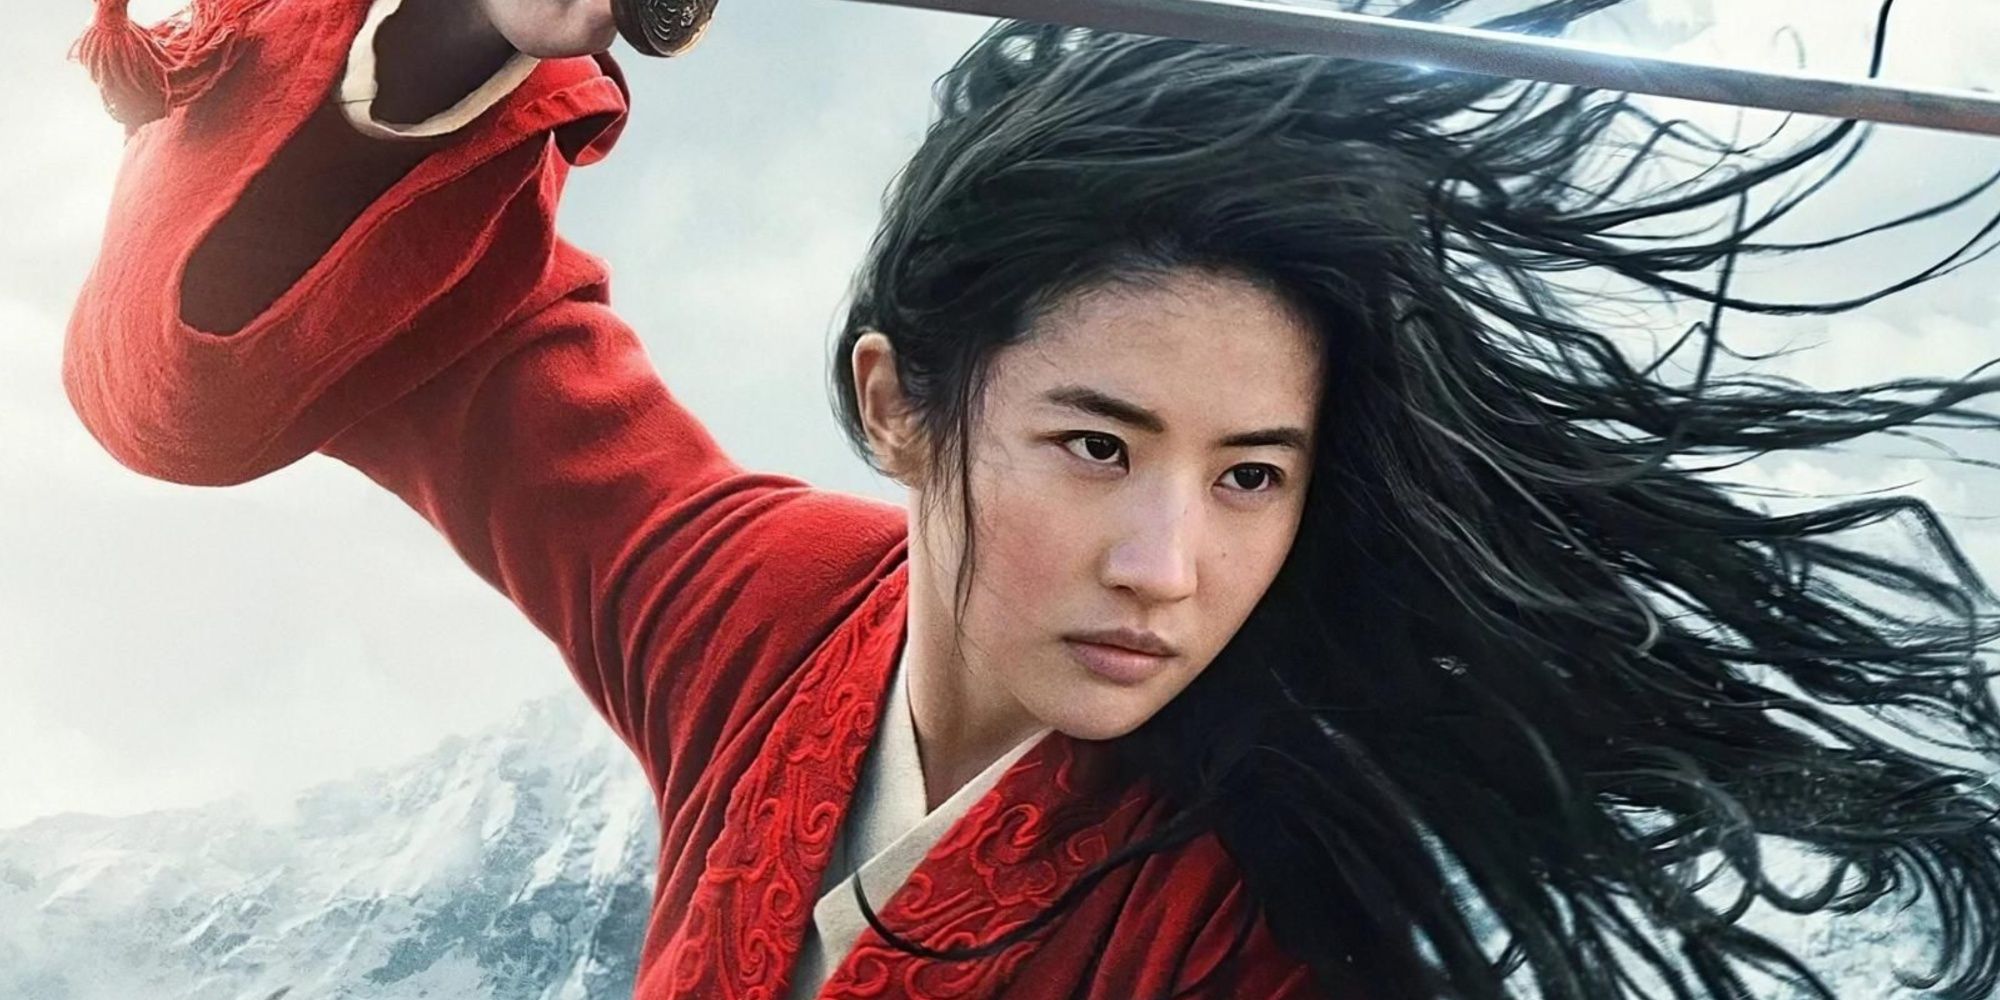 Mulan, who appears on the cover of the movie, is wearing a red robe, holding a blade, and her hair is blowing in the wind.